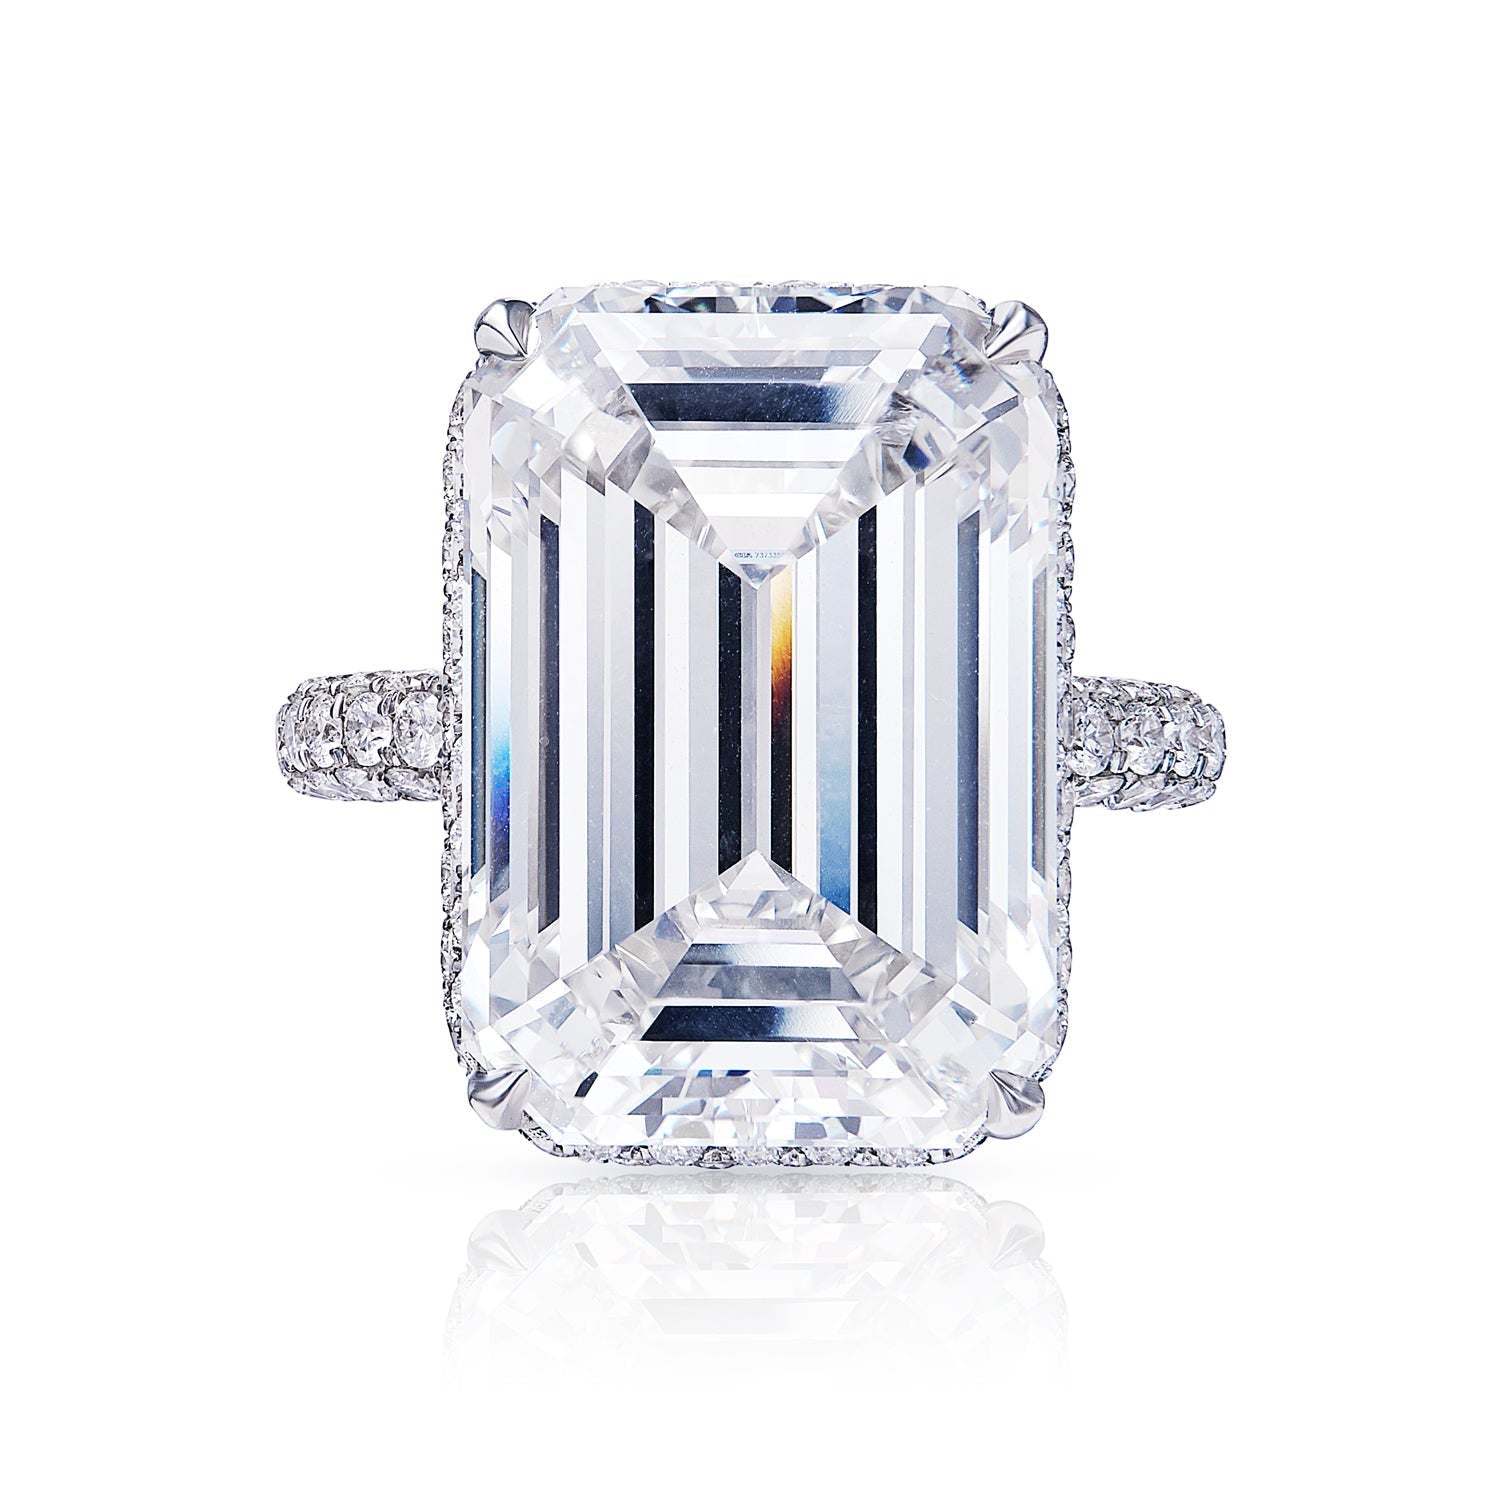 Kylie 23 Carat G VVS1 Earth Mined Emerald Cut Diamond Engagement Ring Sidestone in Platinum. GIA Certified Front View